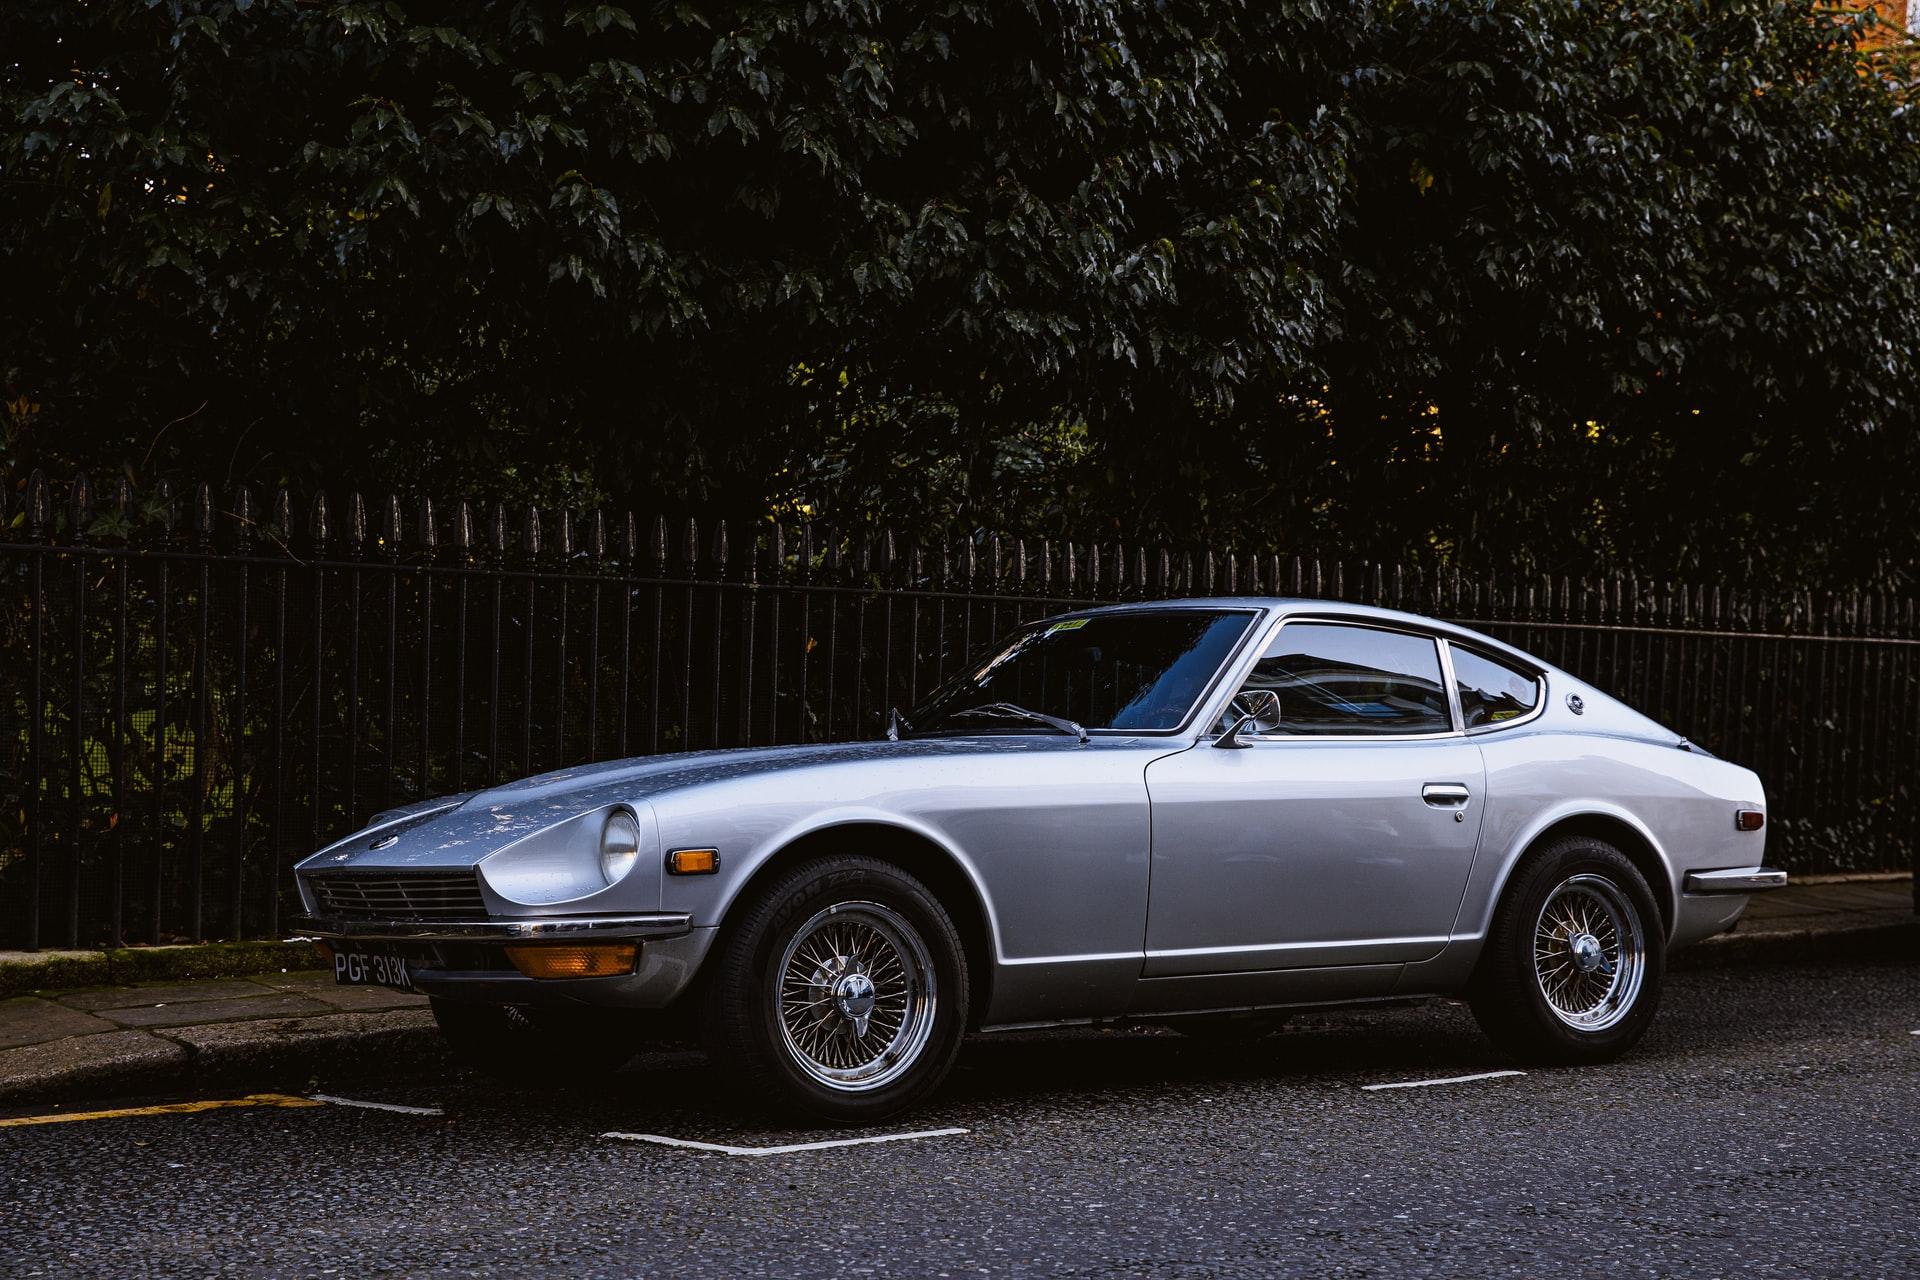 Nissan produced a nostalgic ad with a Datsun 240Z and Brie Larson.